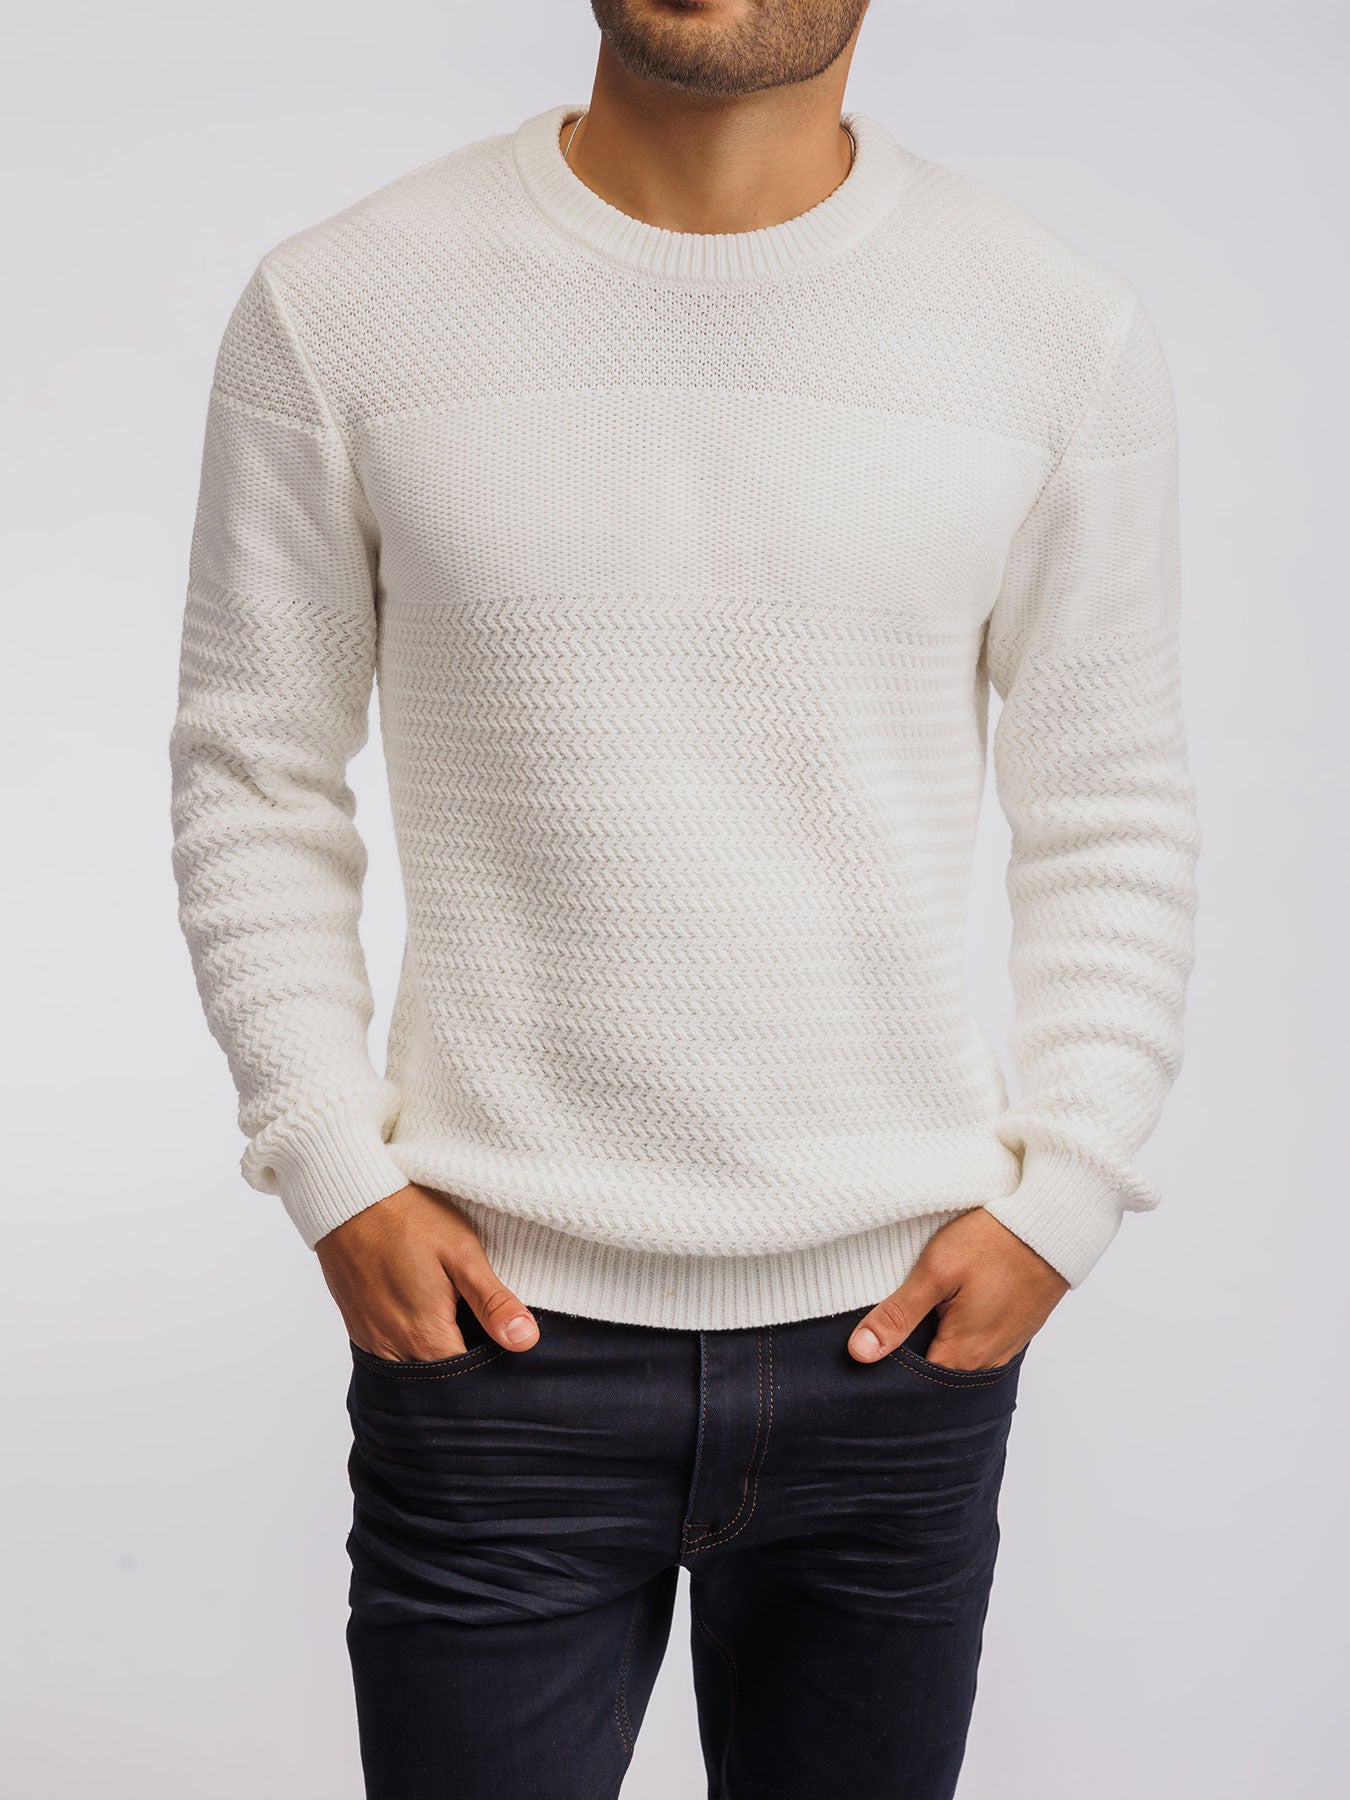 Woven Sweater